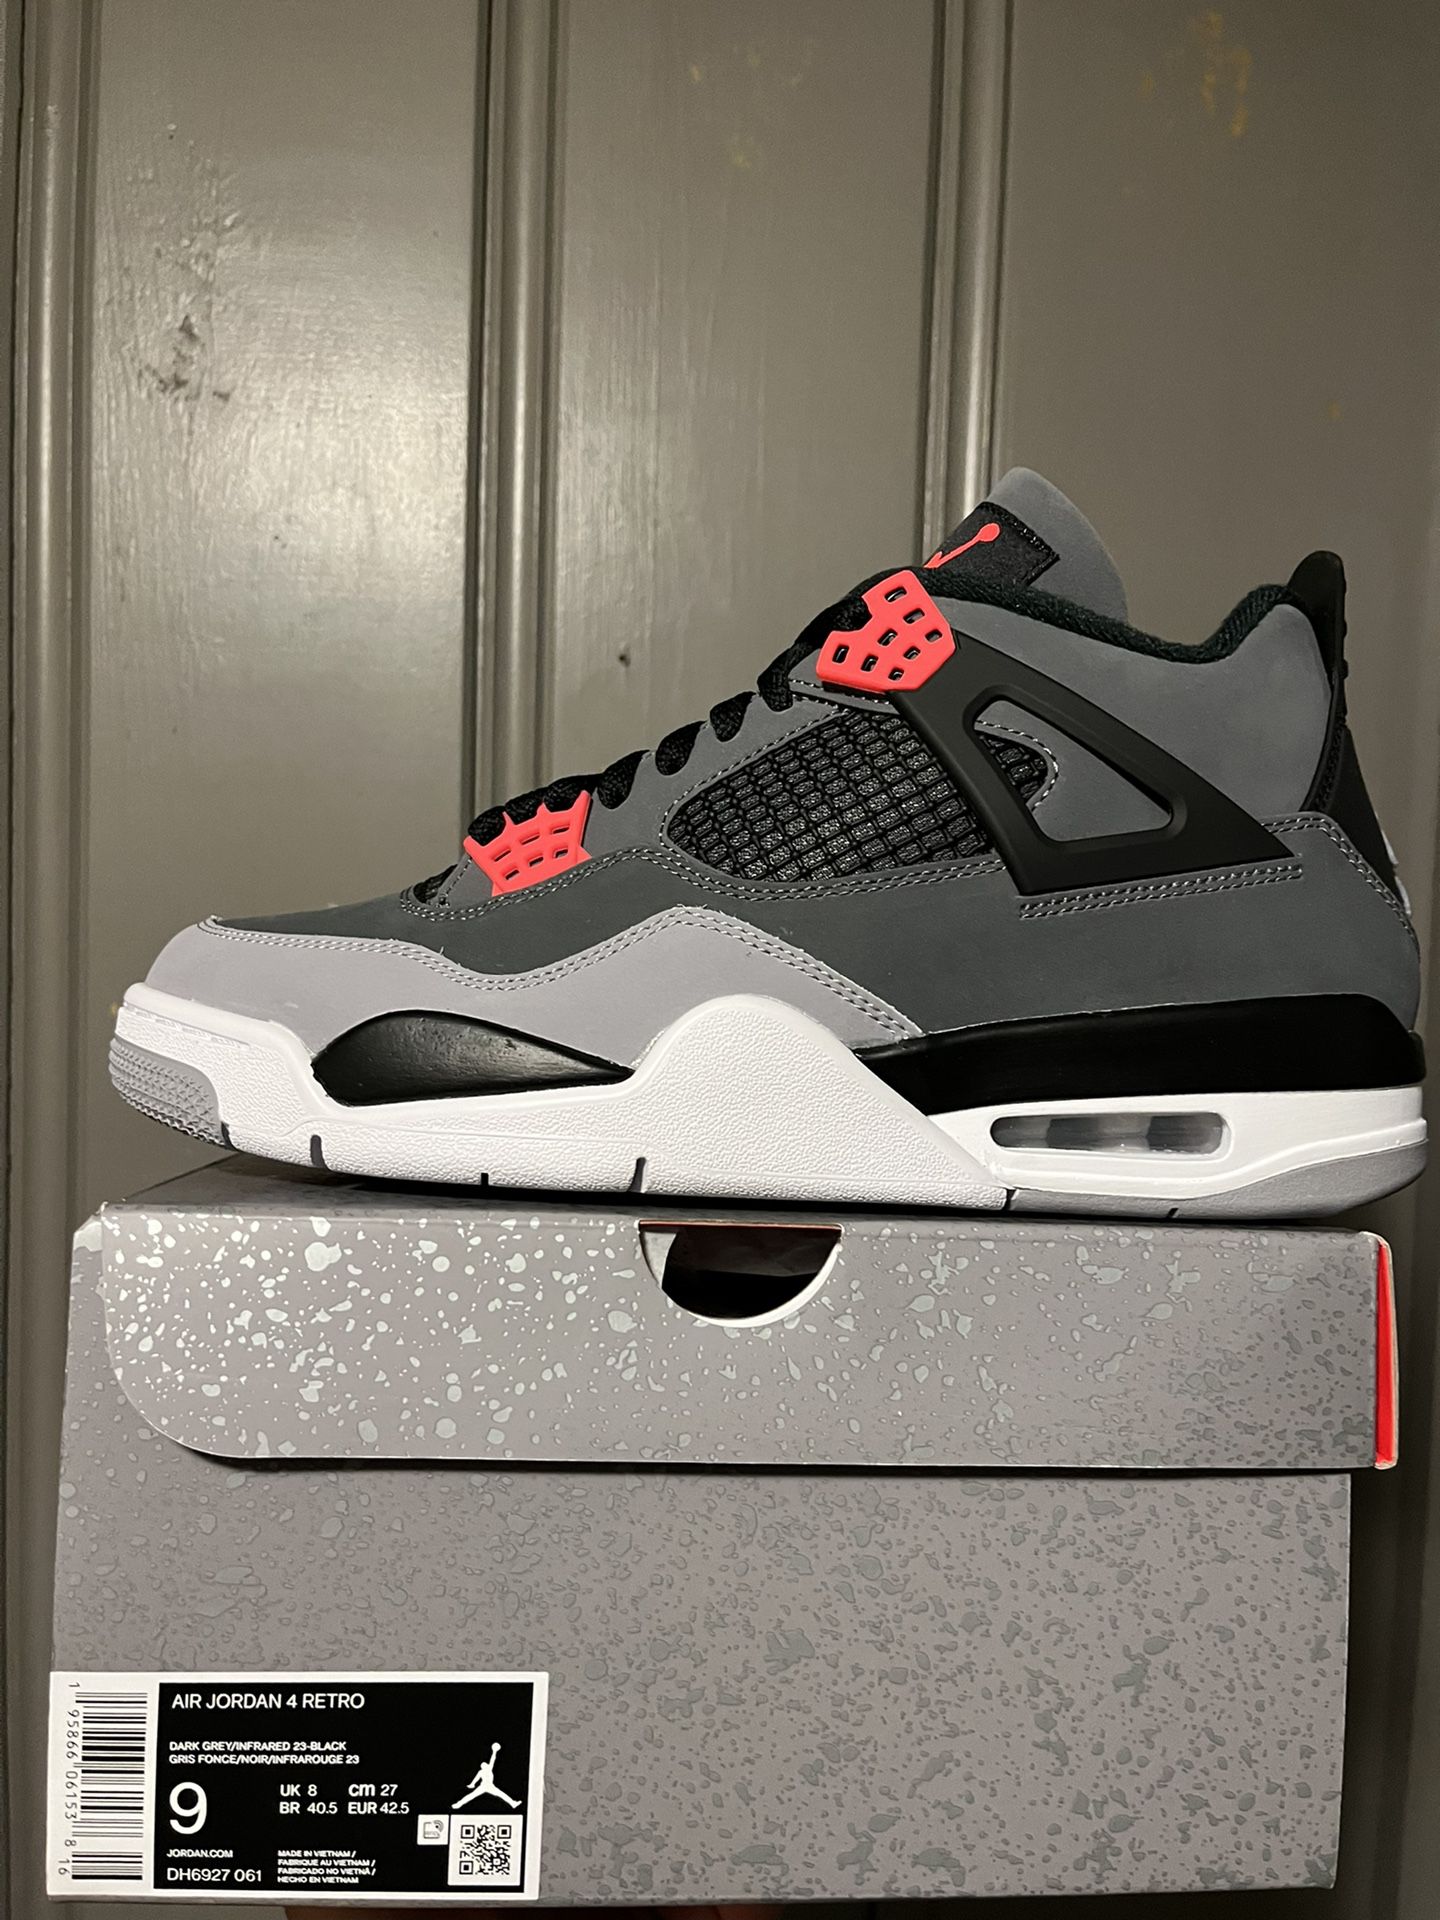 Jordan 4 retro “Infrared” size (9). In Mens. DS(New). Factory laced. With Receipt 🧾. $245 cash. No Trades. Cash only!🌚🔴